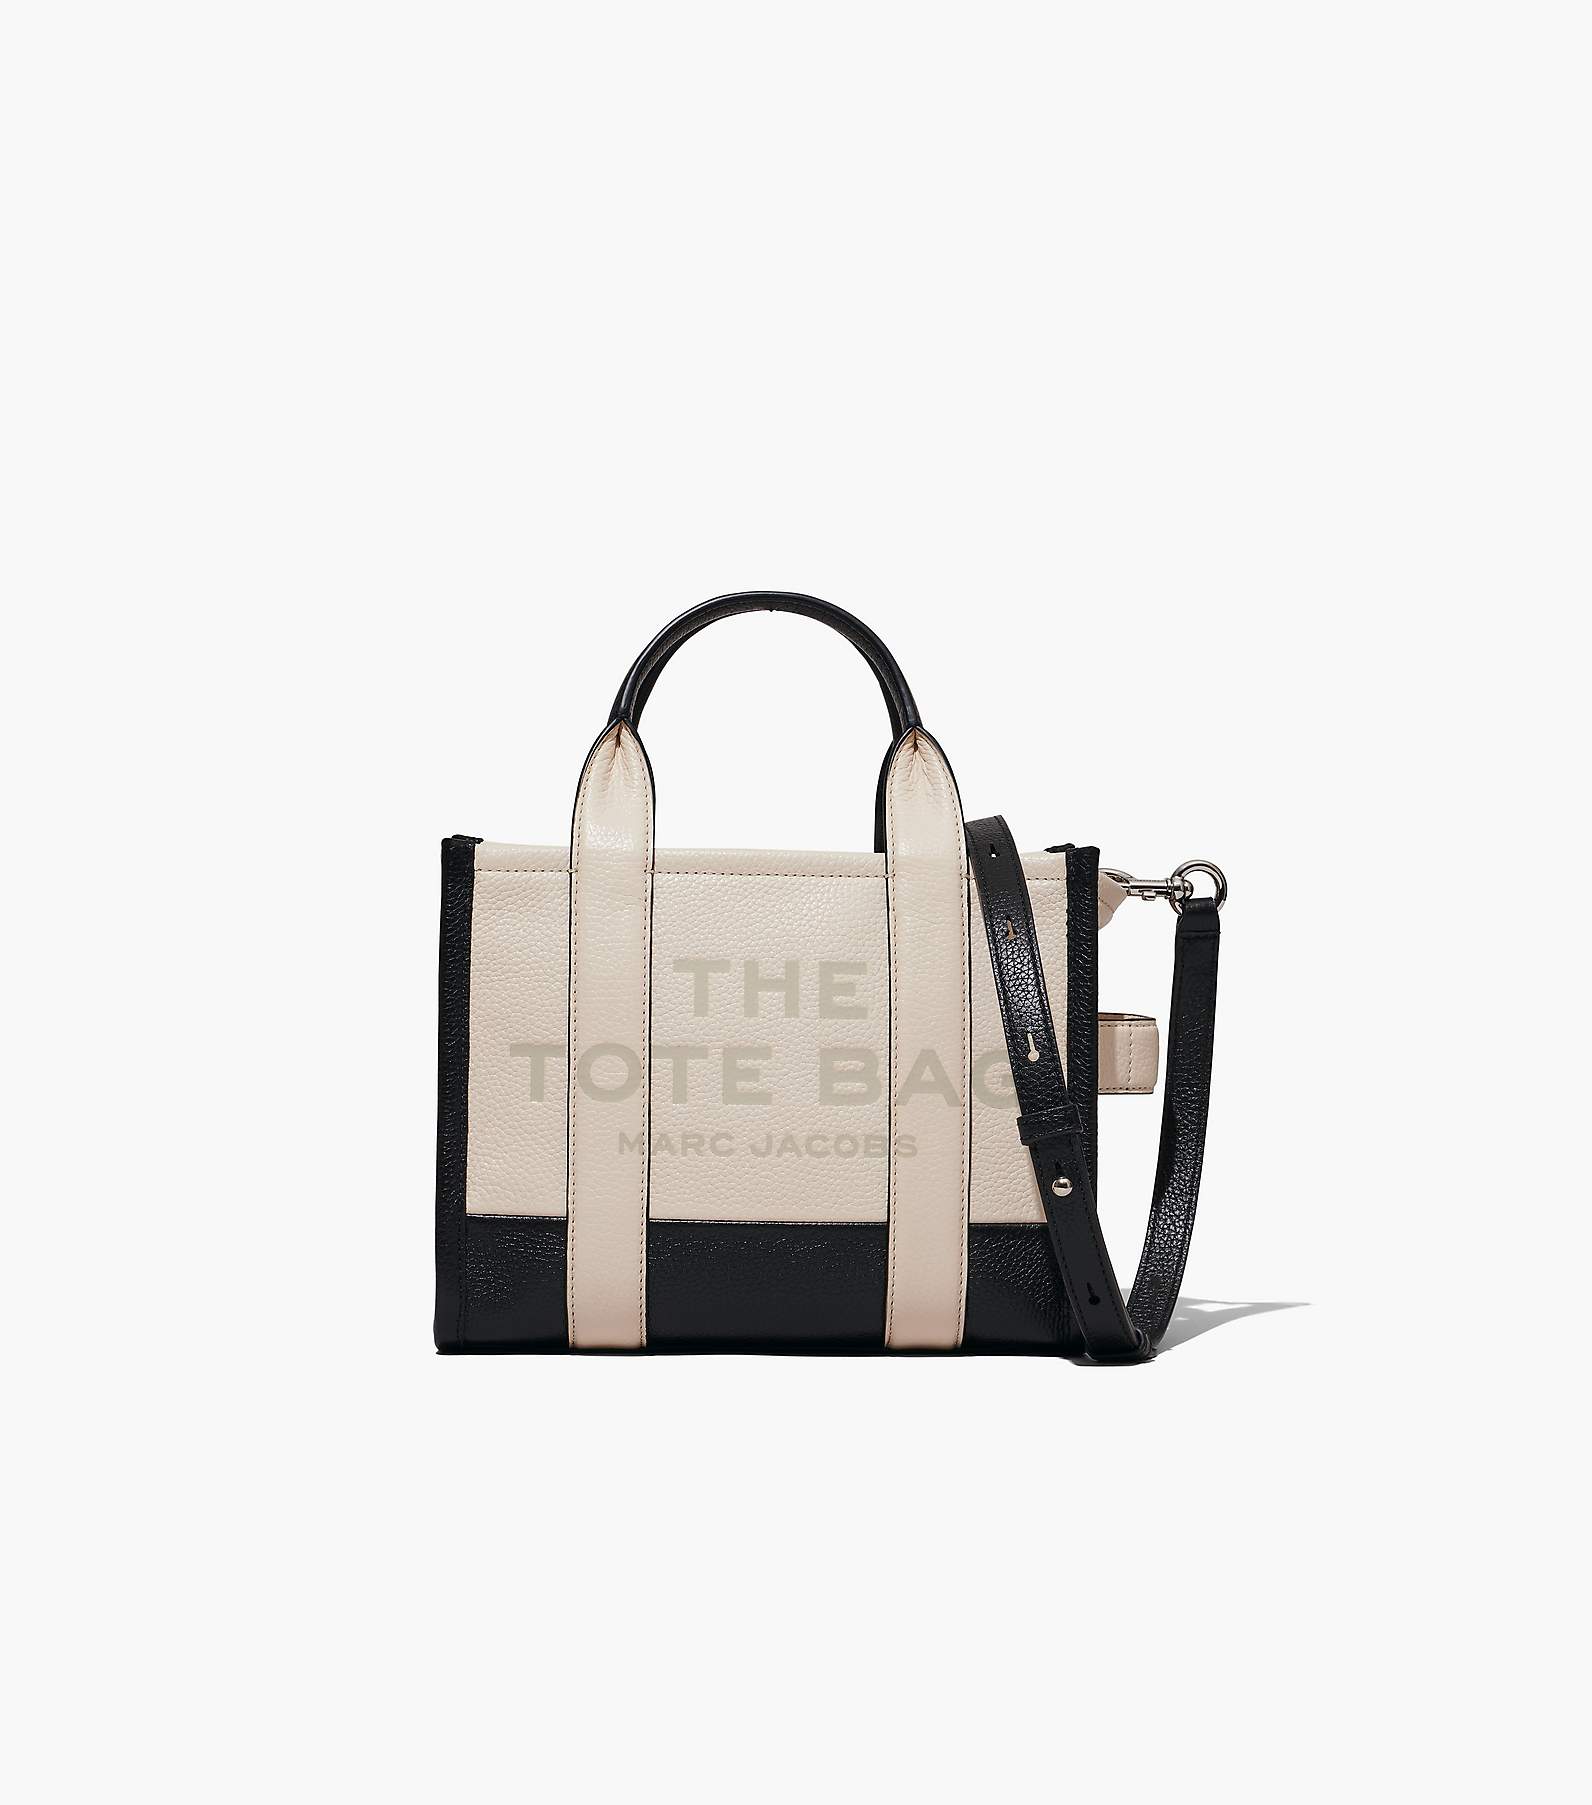 The Small Tote Bag - Marc Jacobs - Black - Leather